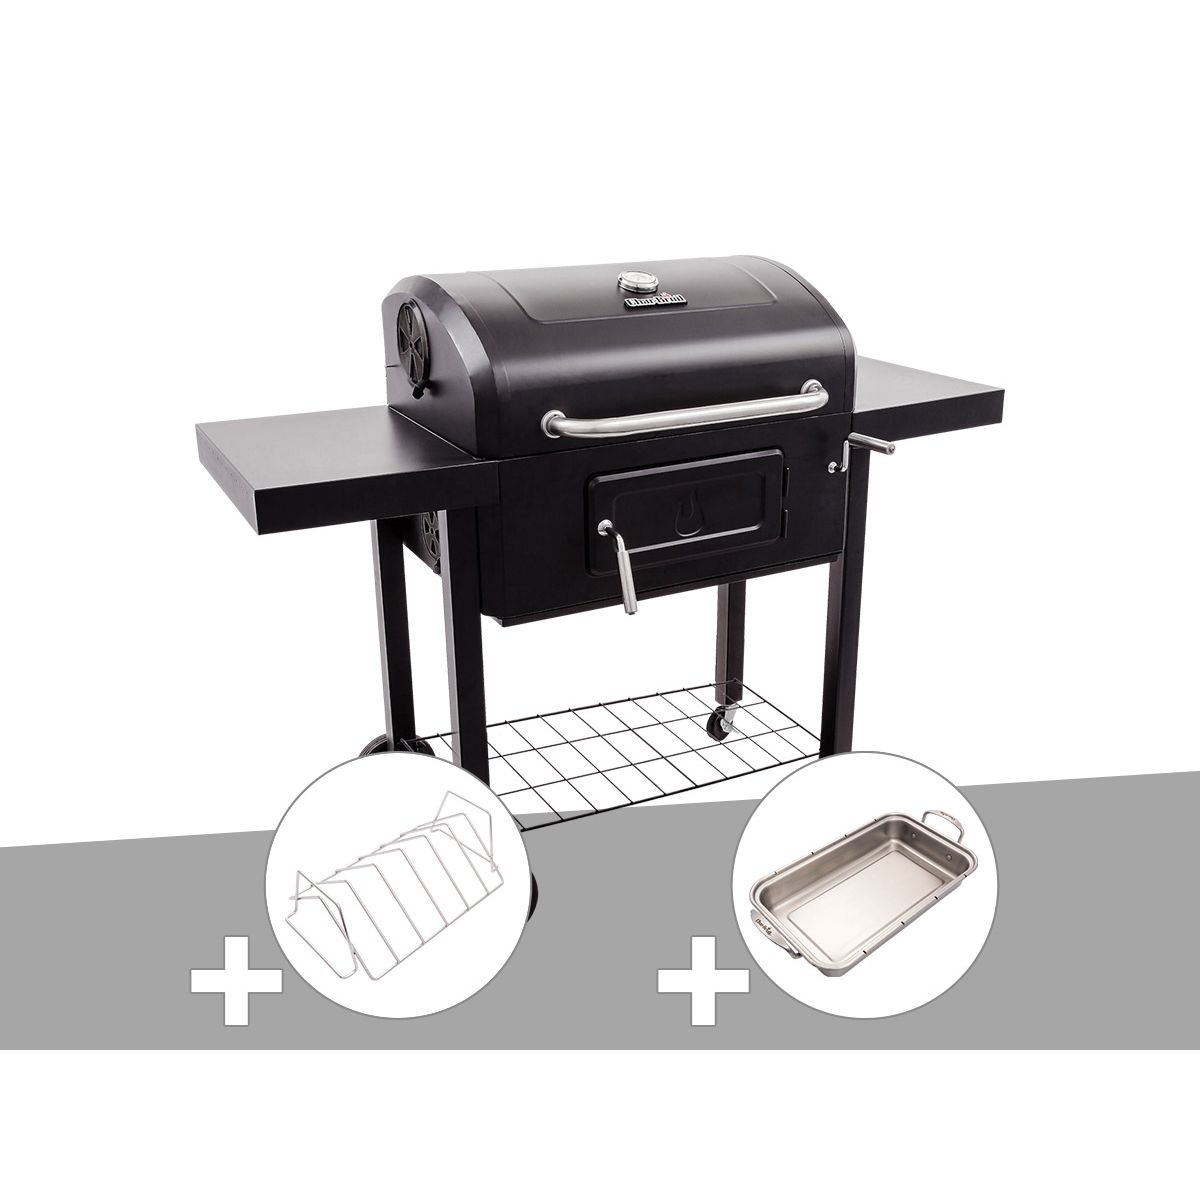 PING Tools Support vertical en acier inoxydable pour barbecue 